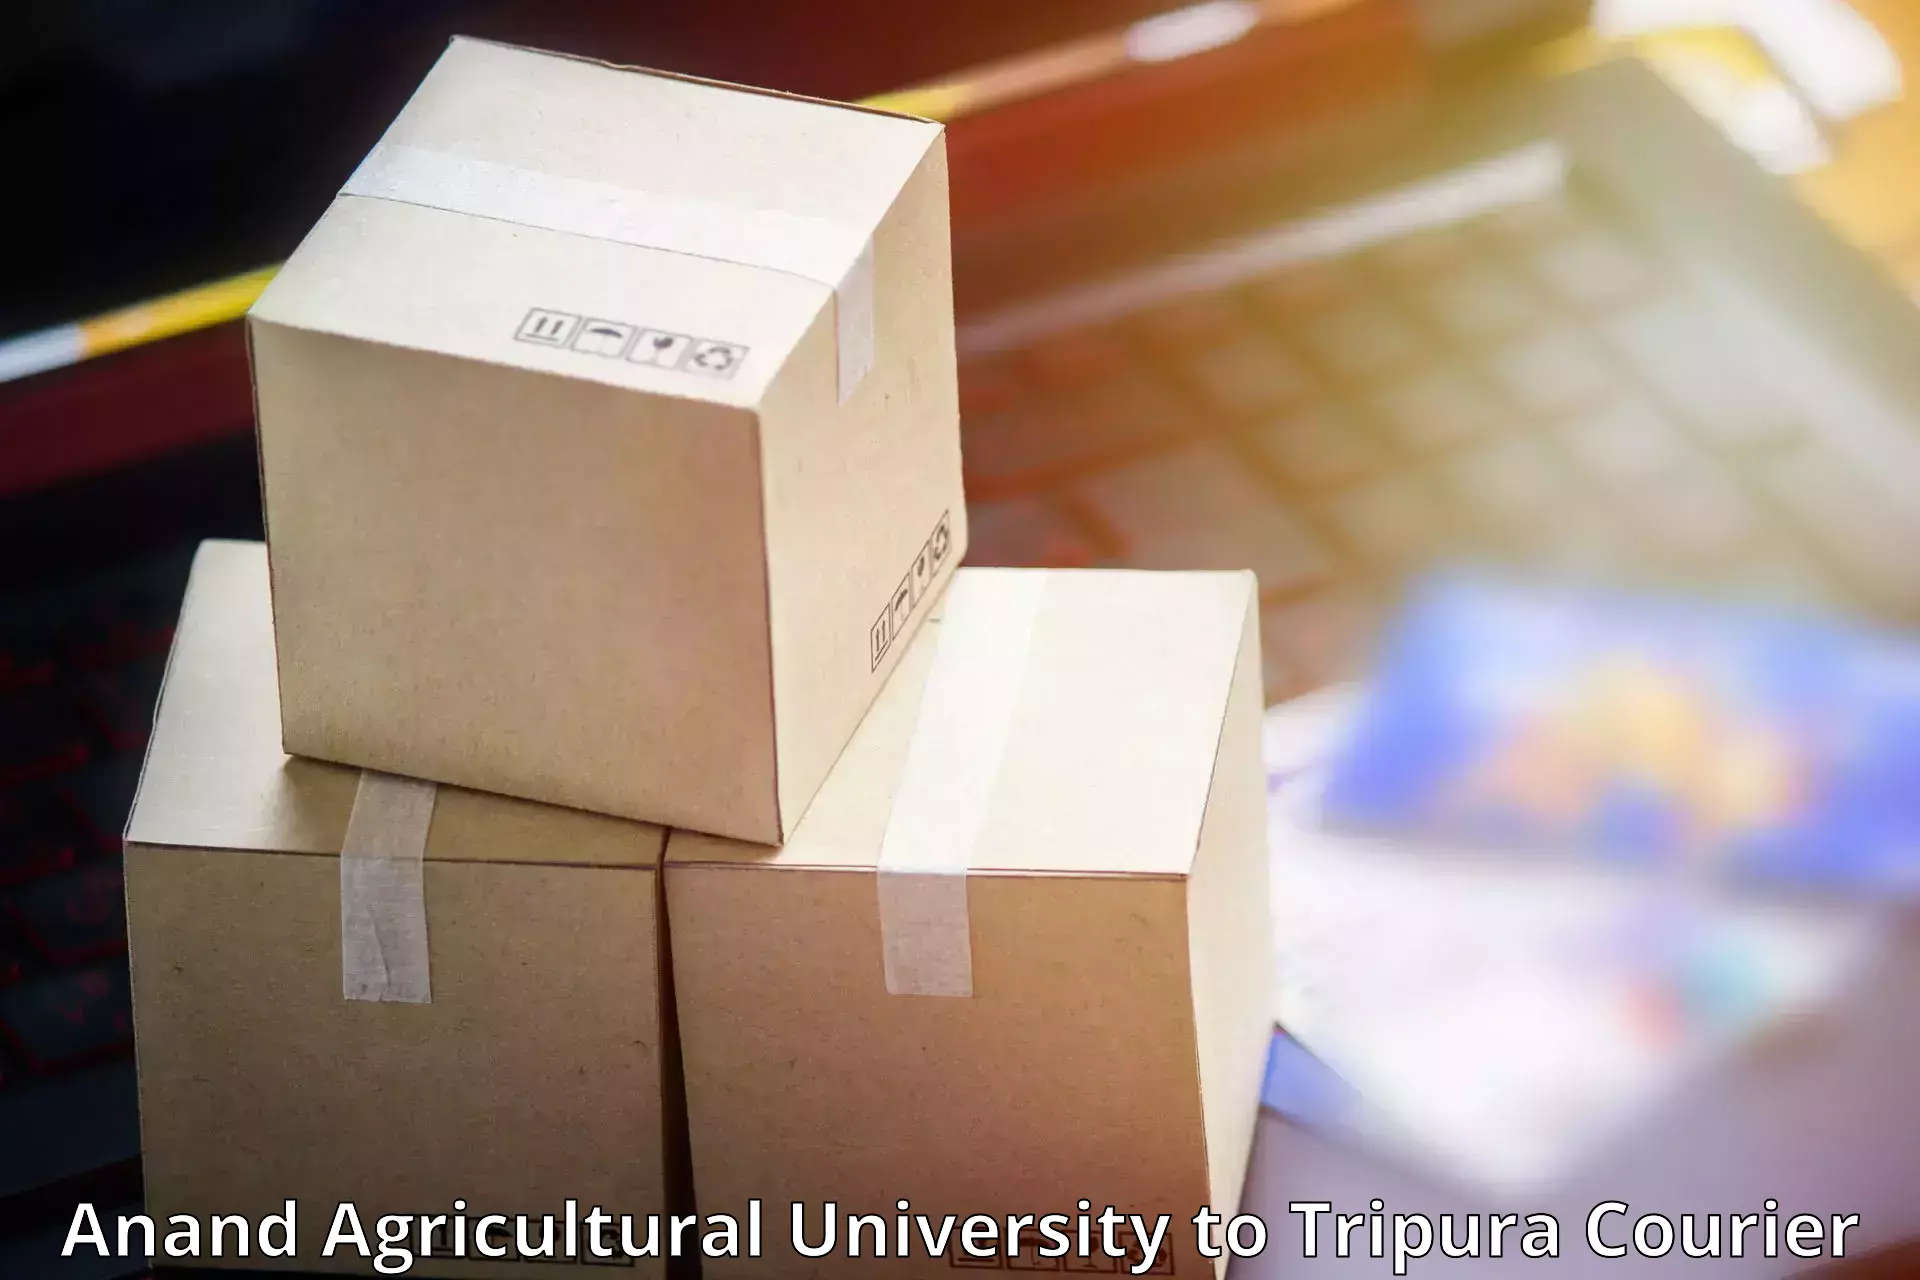 Professional parcel services Anand Agricultural University to West Tripura